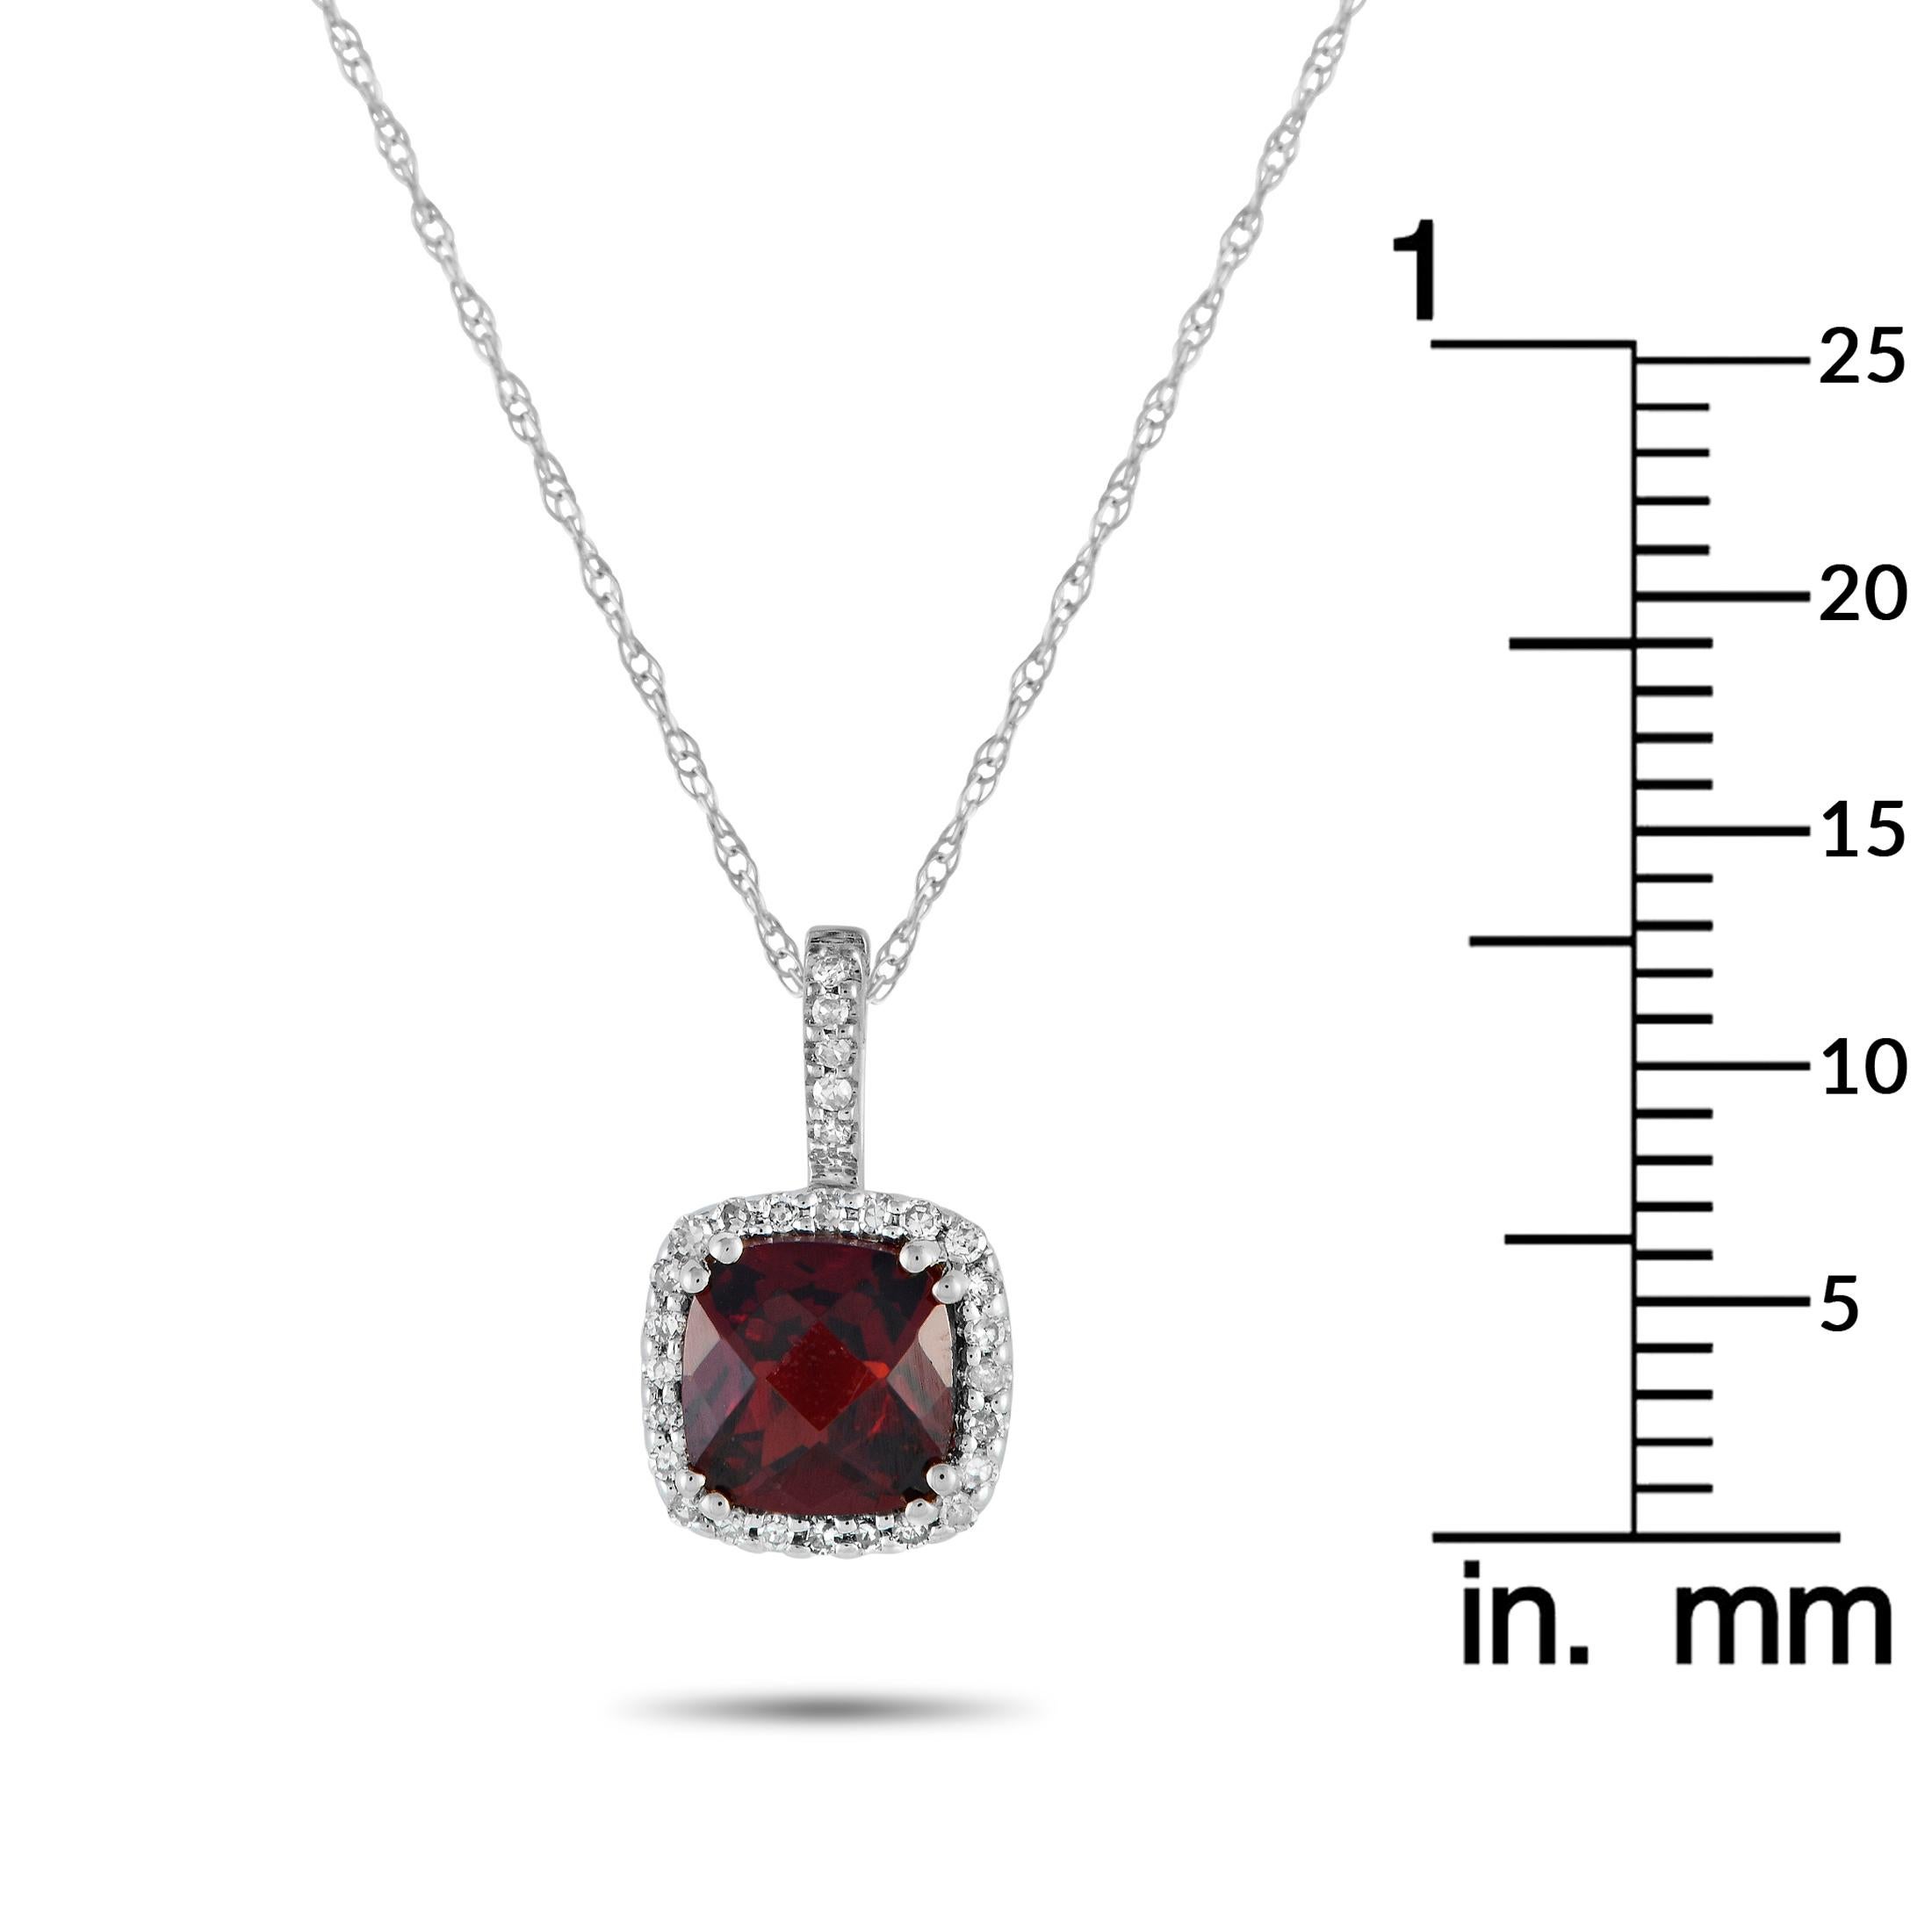 LB Exclusive 14K White Gold 0.09ct Diamond Pendant Necklace PD4-16269WGA In New Condition For Sale In Southampton, PA